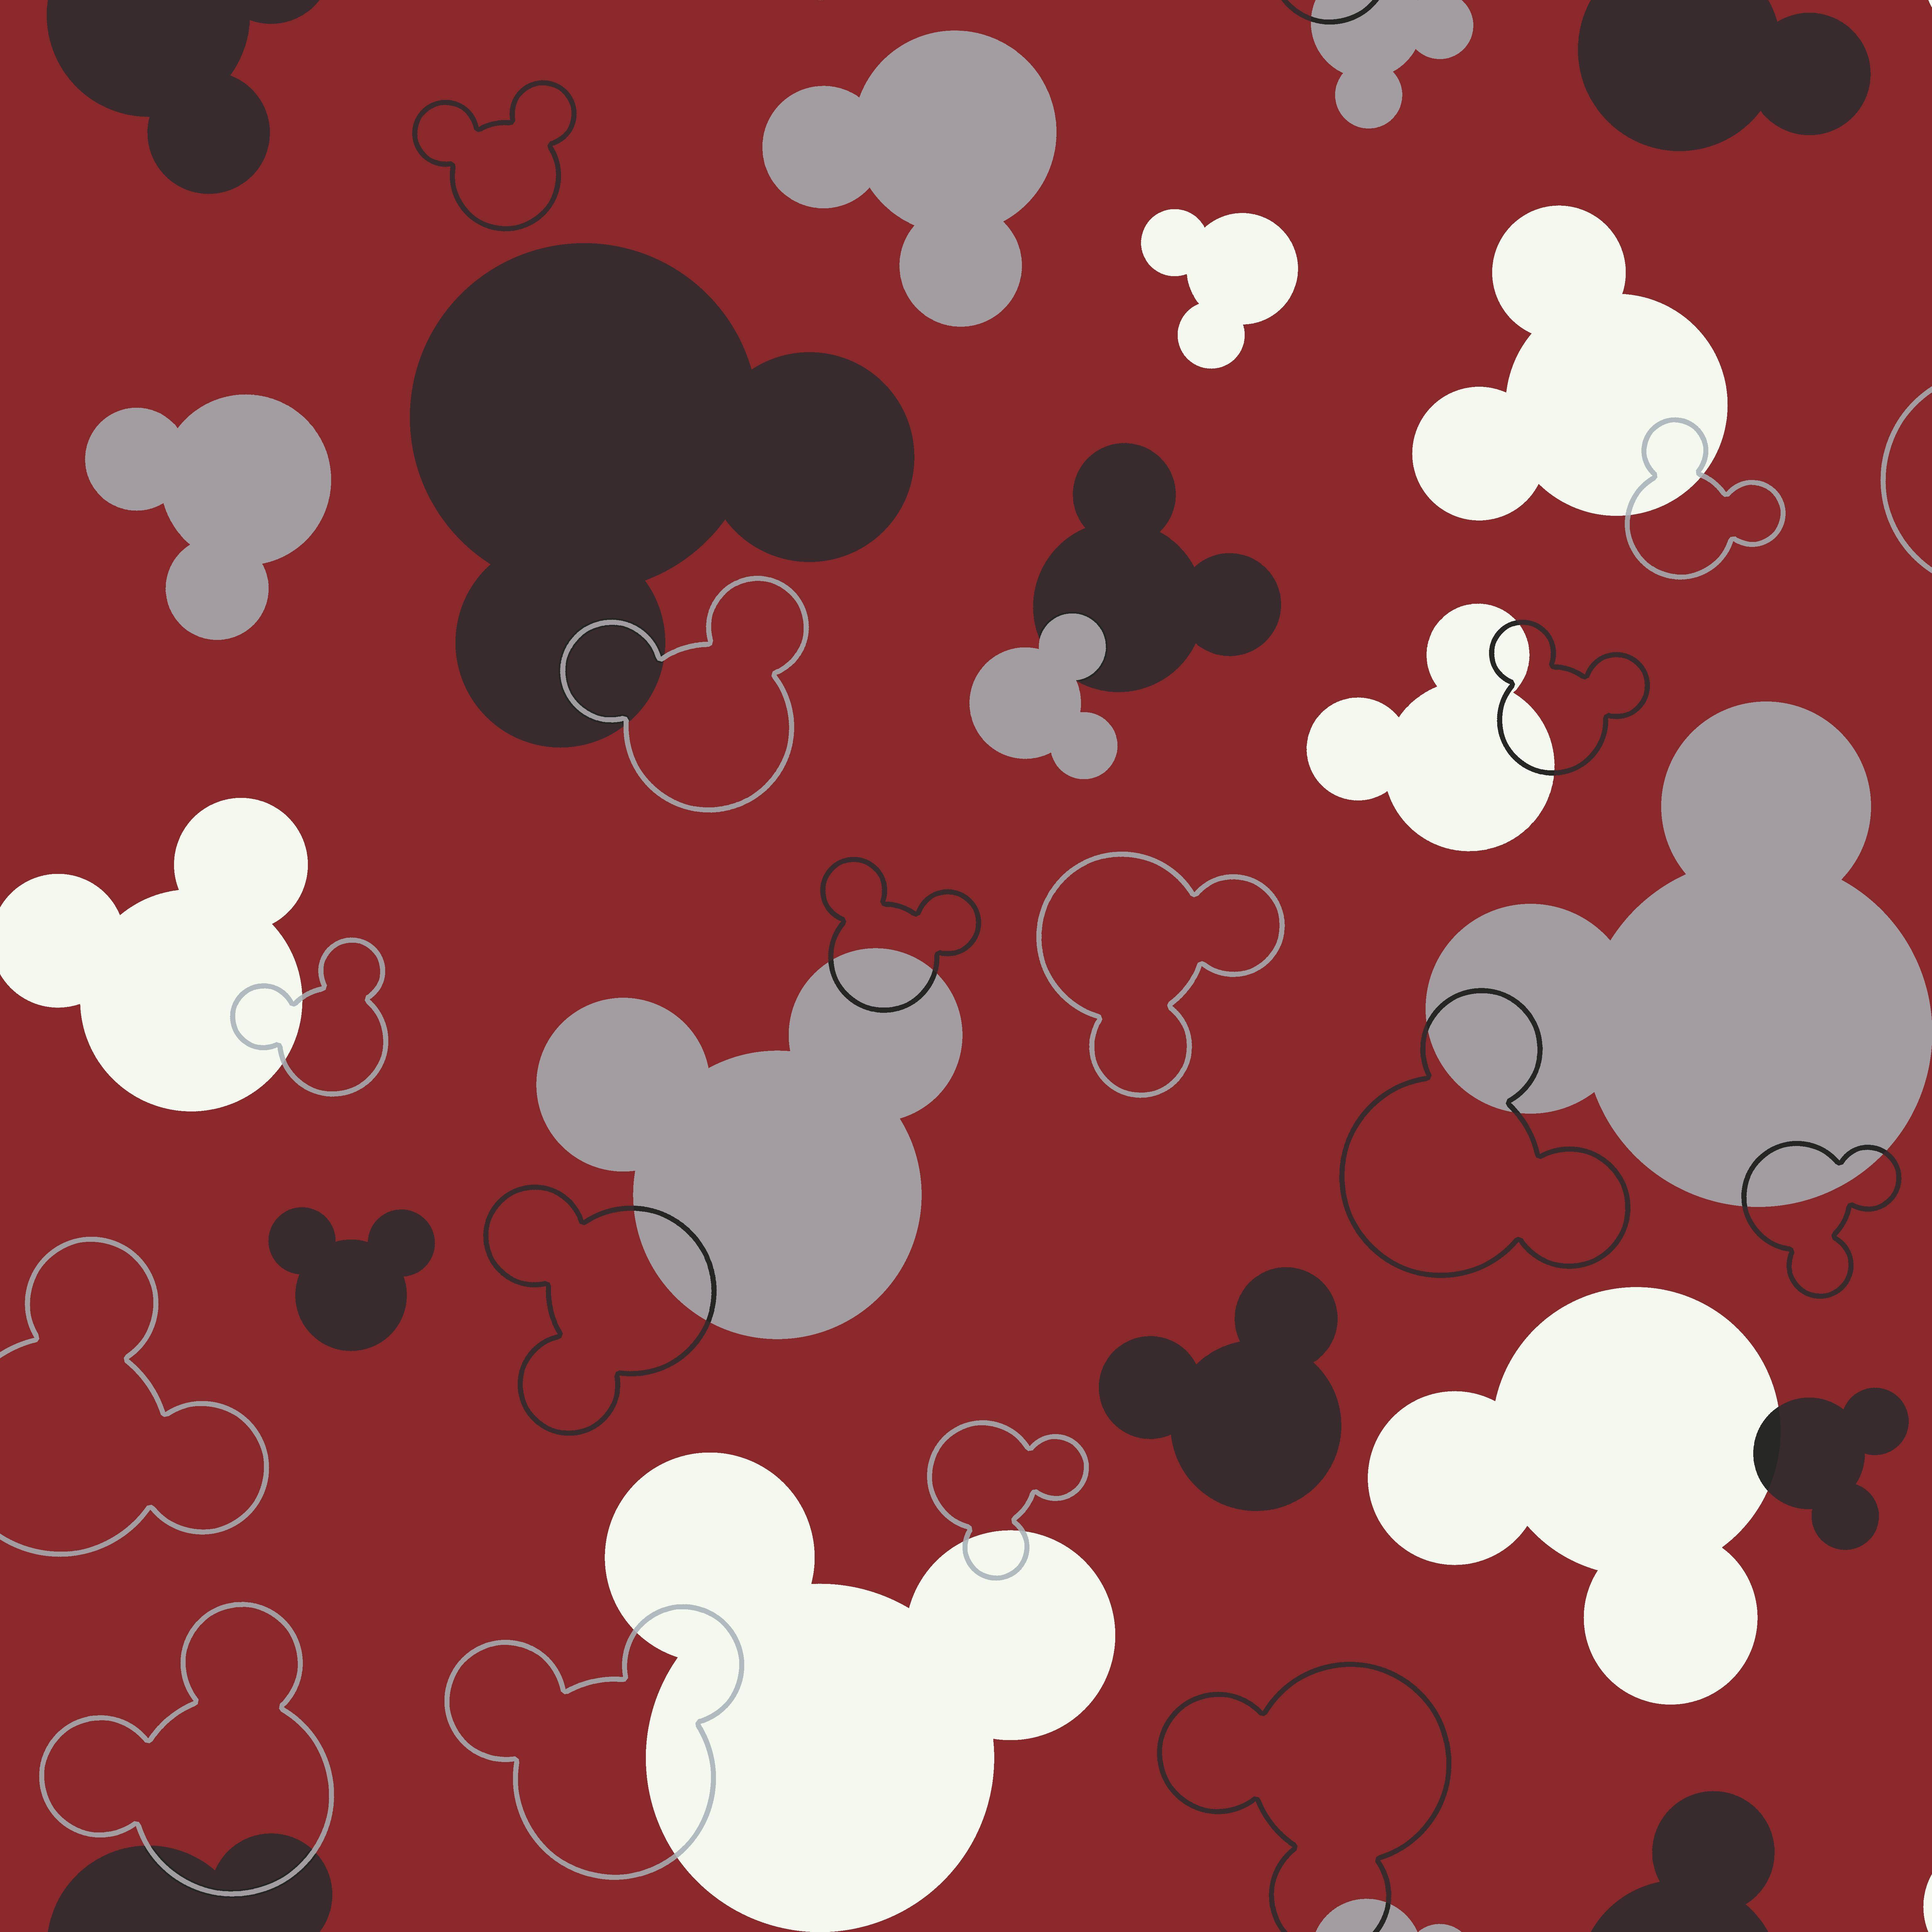 Red And Black Mickey Mouse Wallpapers - Wallpaper Cave